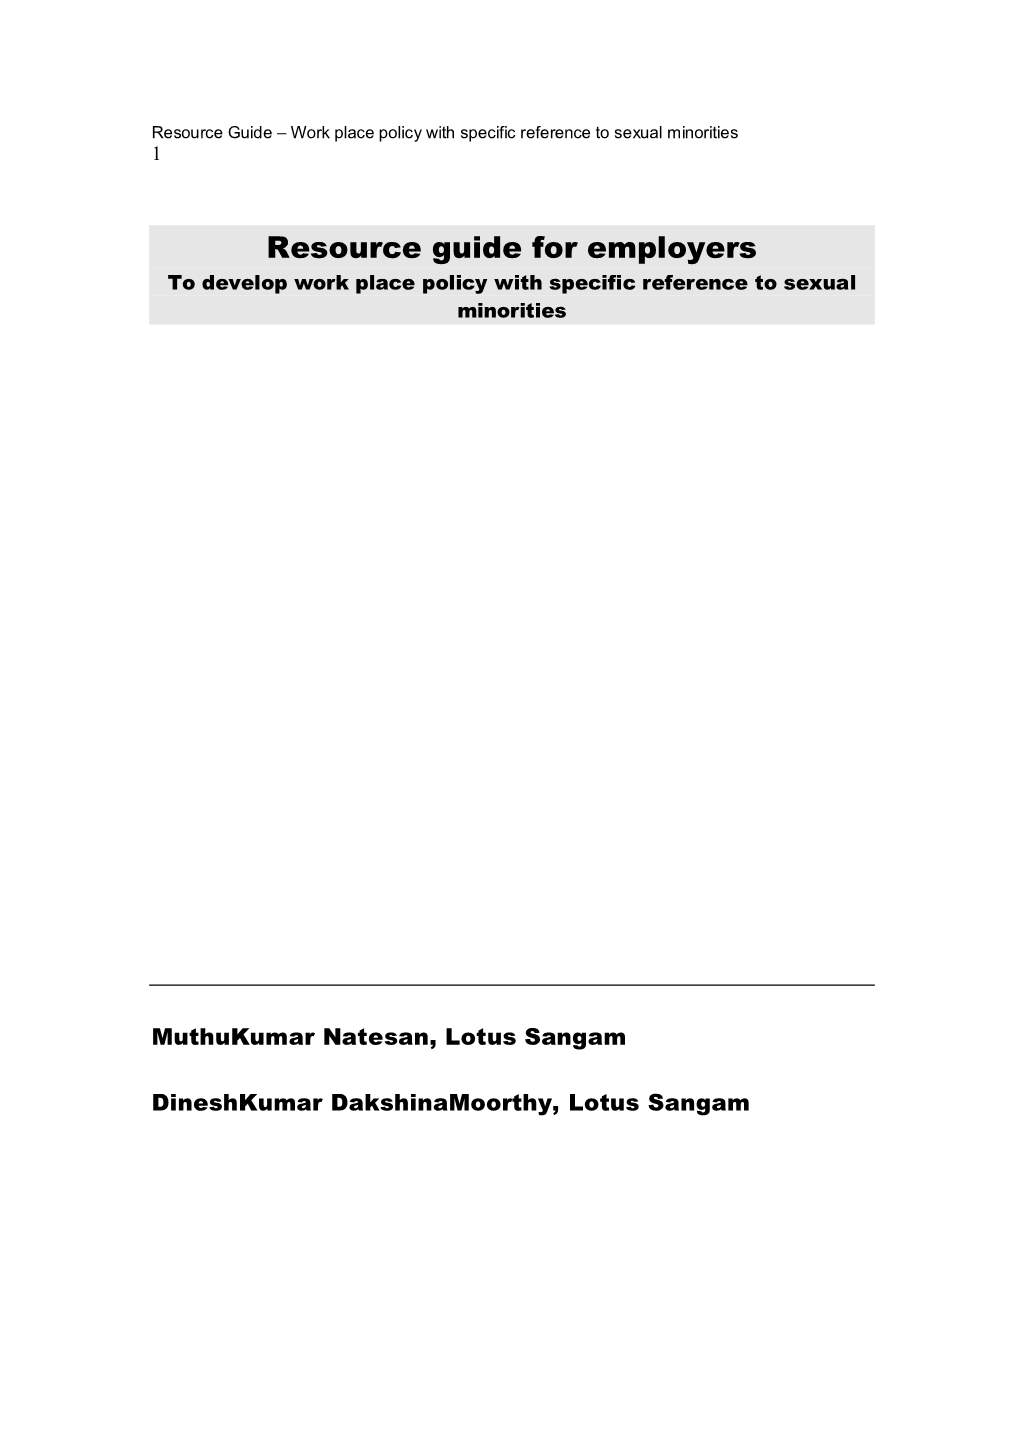 Resource Guide for Employers to Develop Work Place Policy with Specific Reference to Sexual Minorities